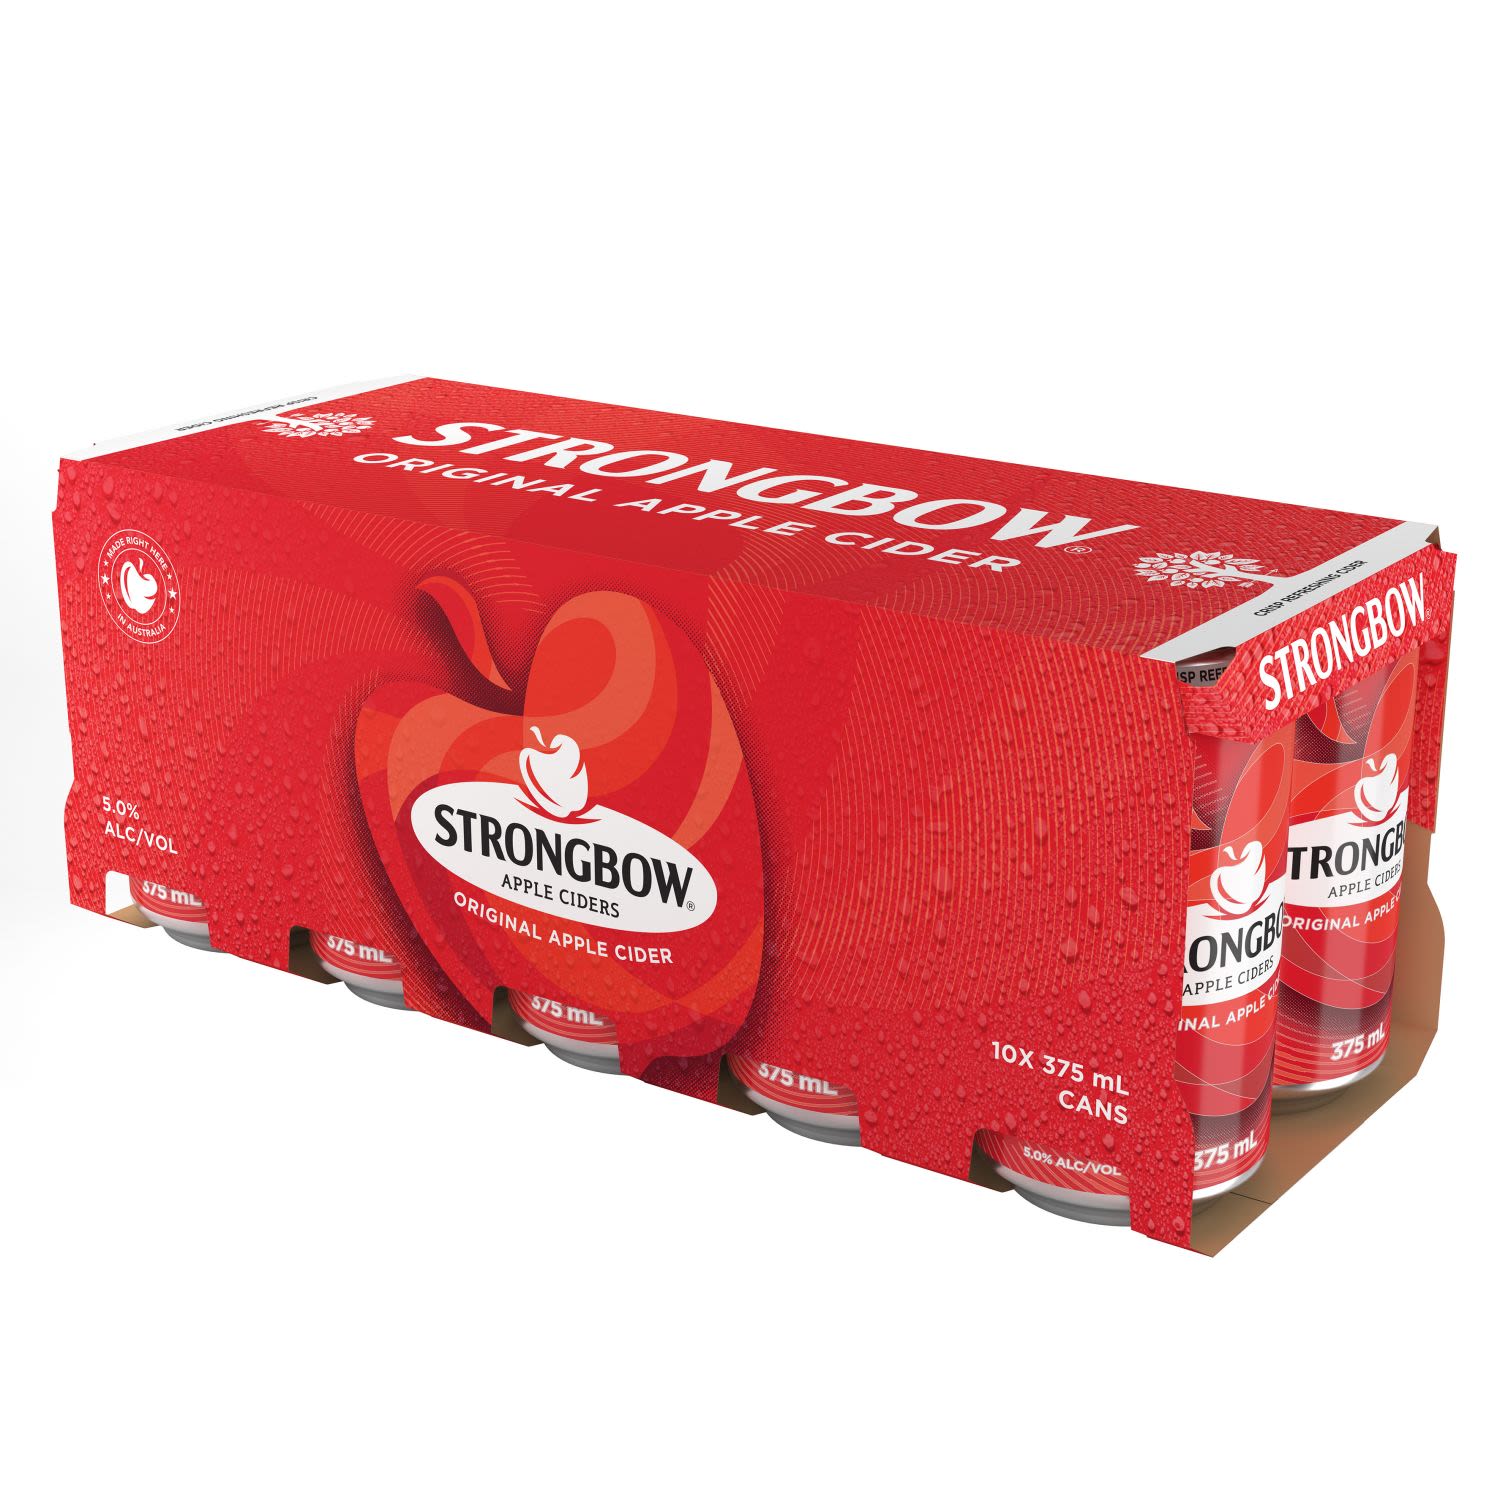 Strongbow Original Apple Cider Can 375mL 10 Pack